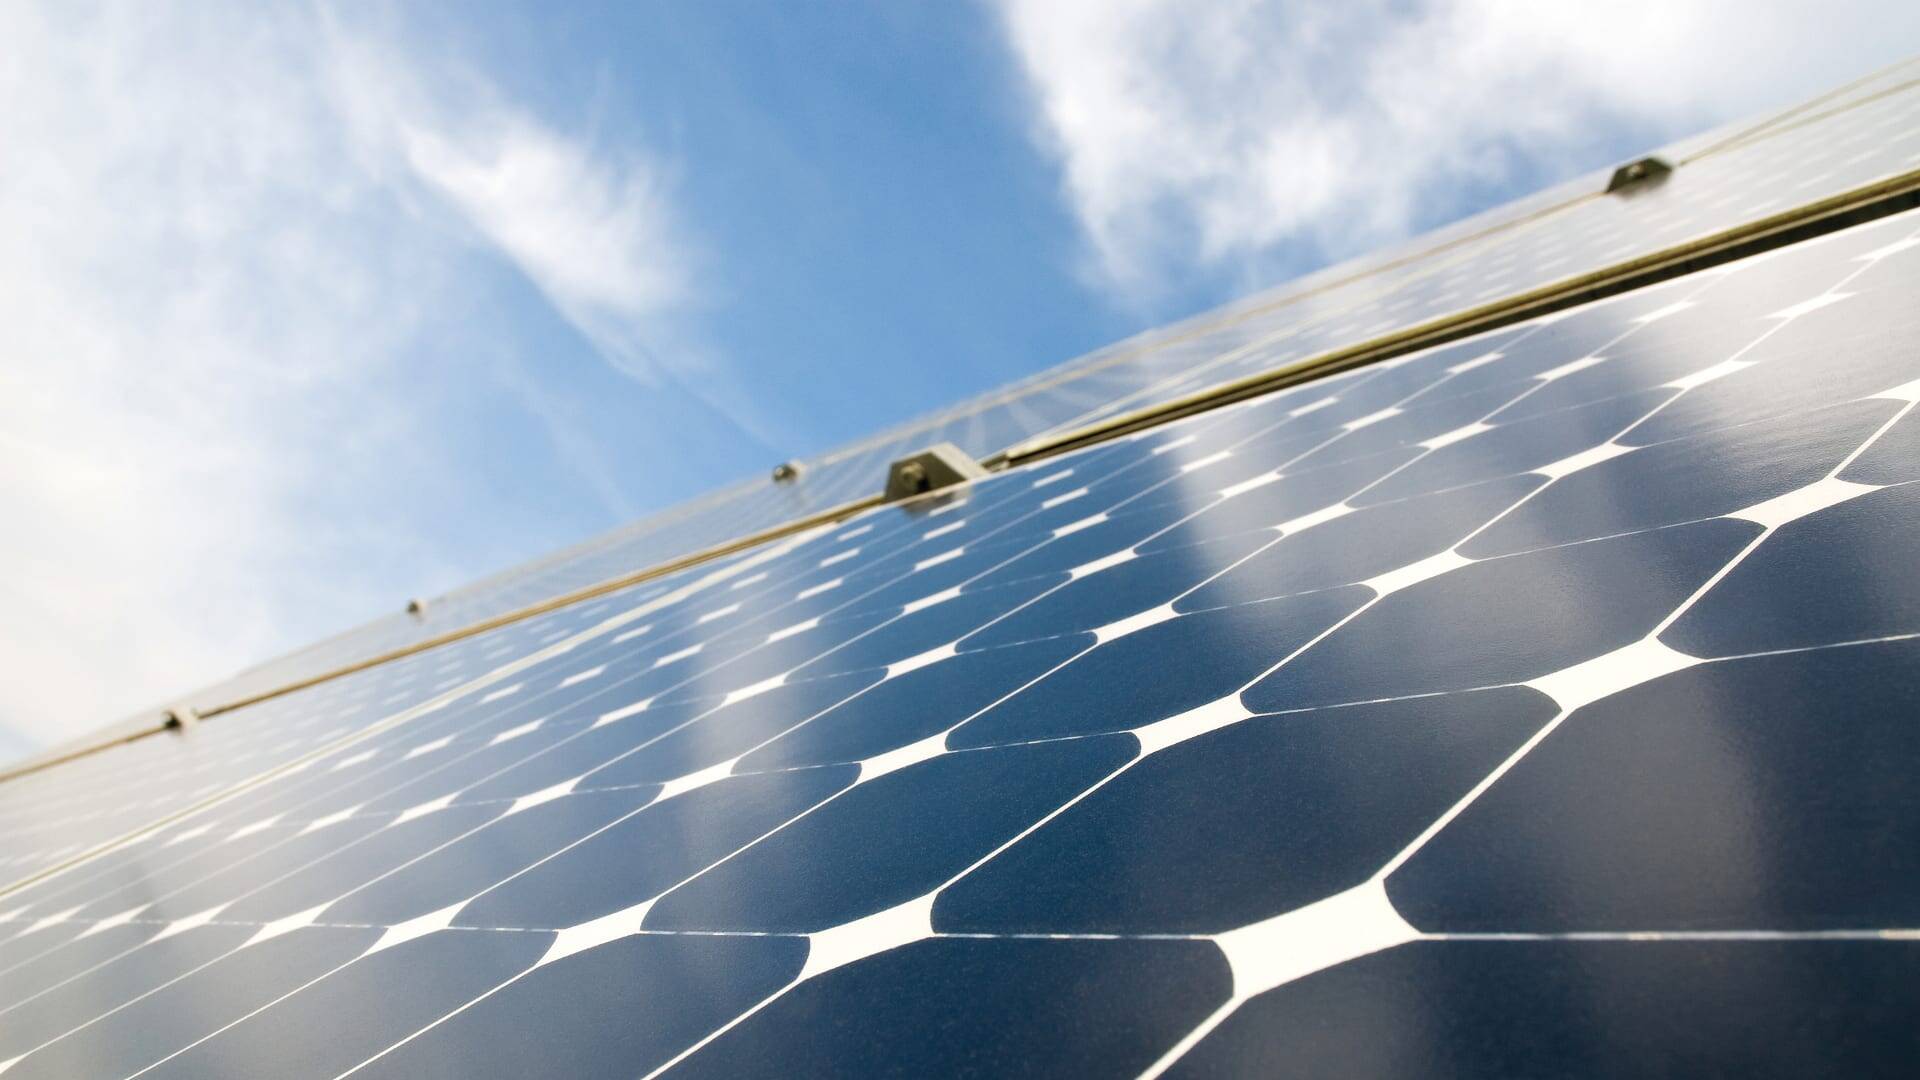 Wiltshire solar farm purchased for £56m